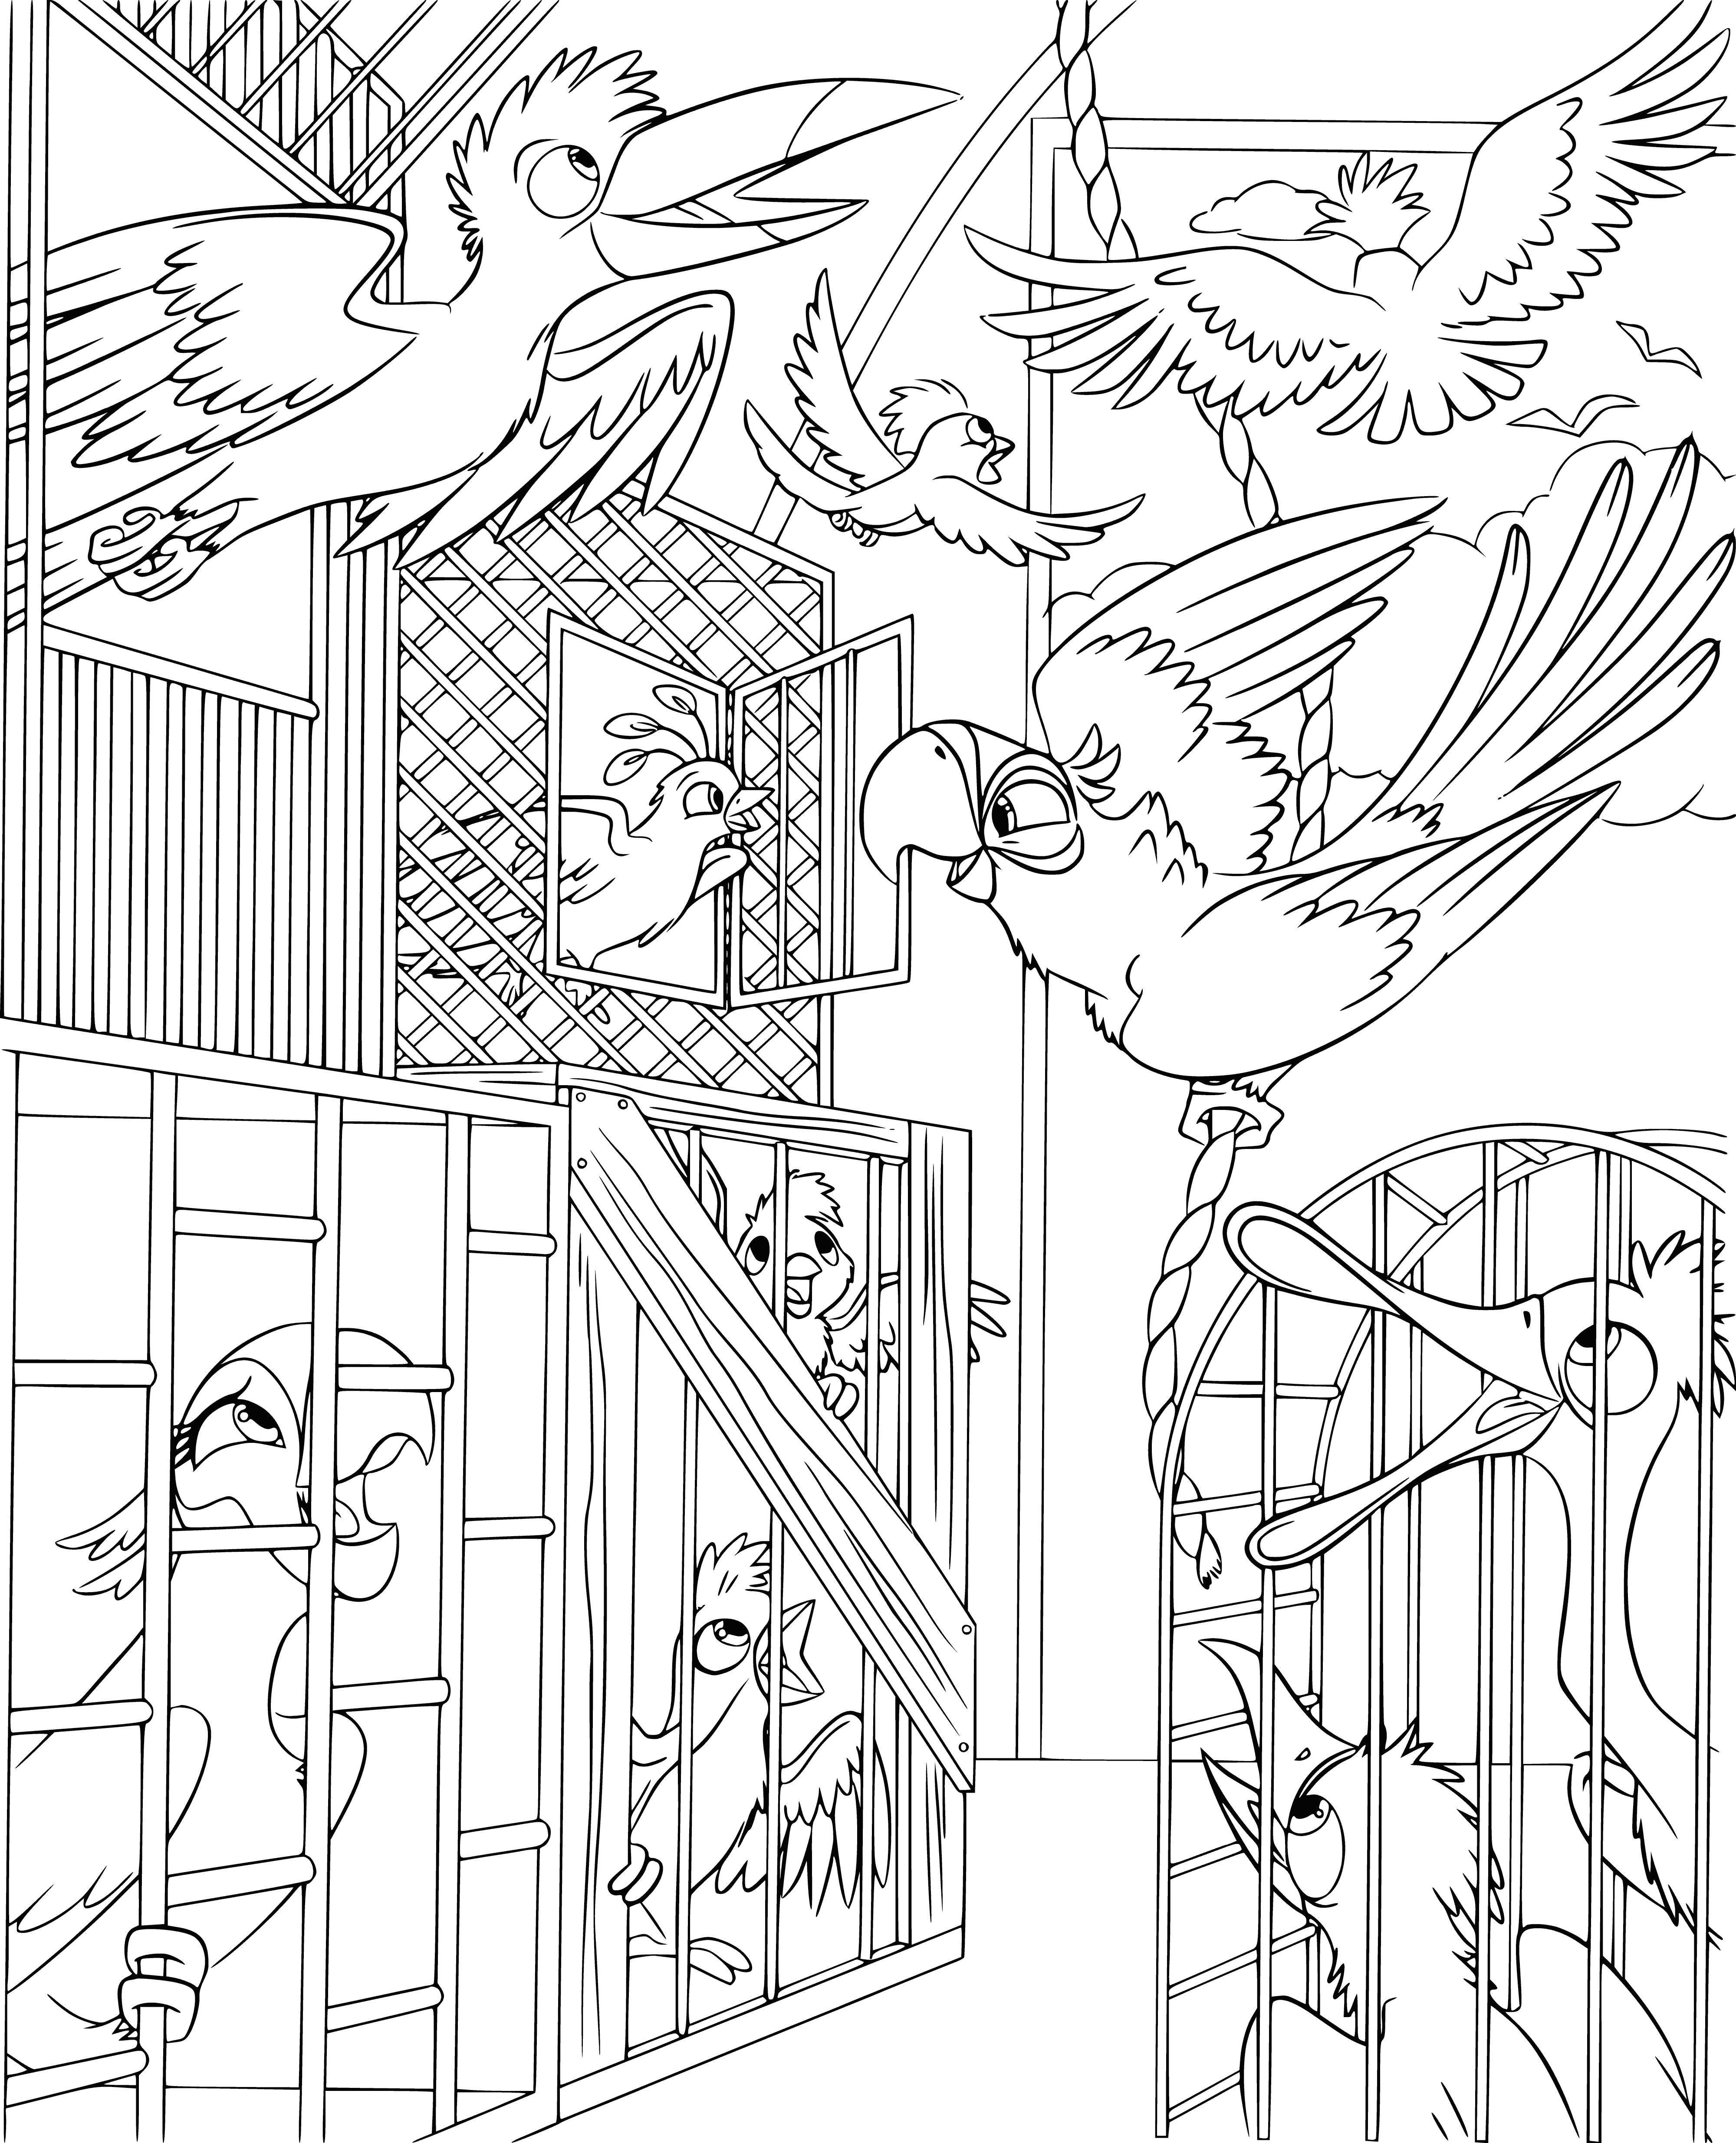 coloring page: Coloring page has a body of water, trees and mountains on one side, buildings on the other, with a bridge in the middle. #coloringpage